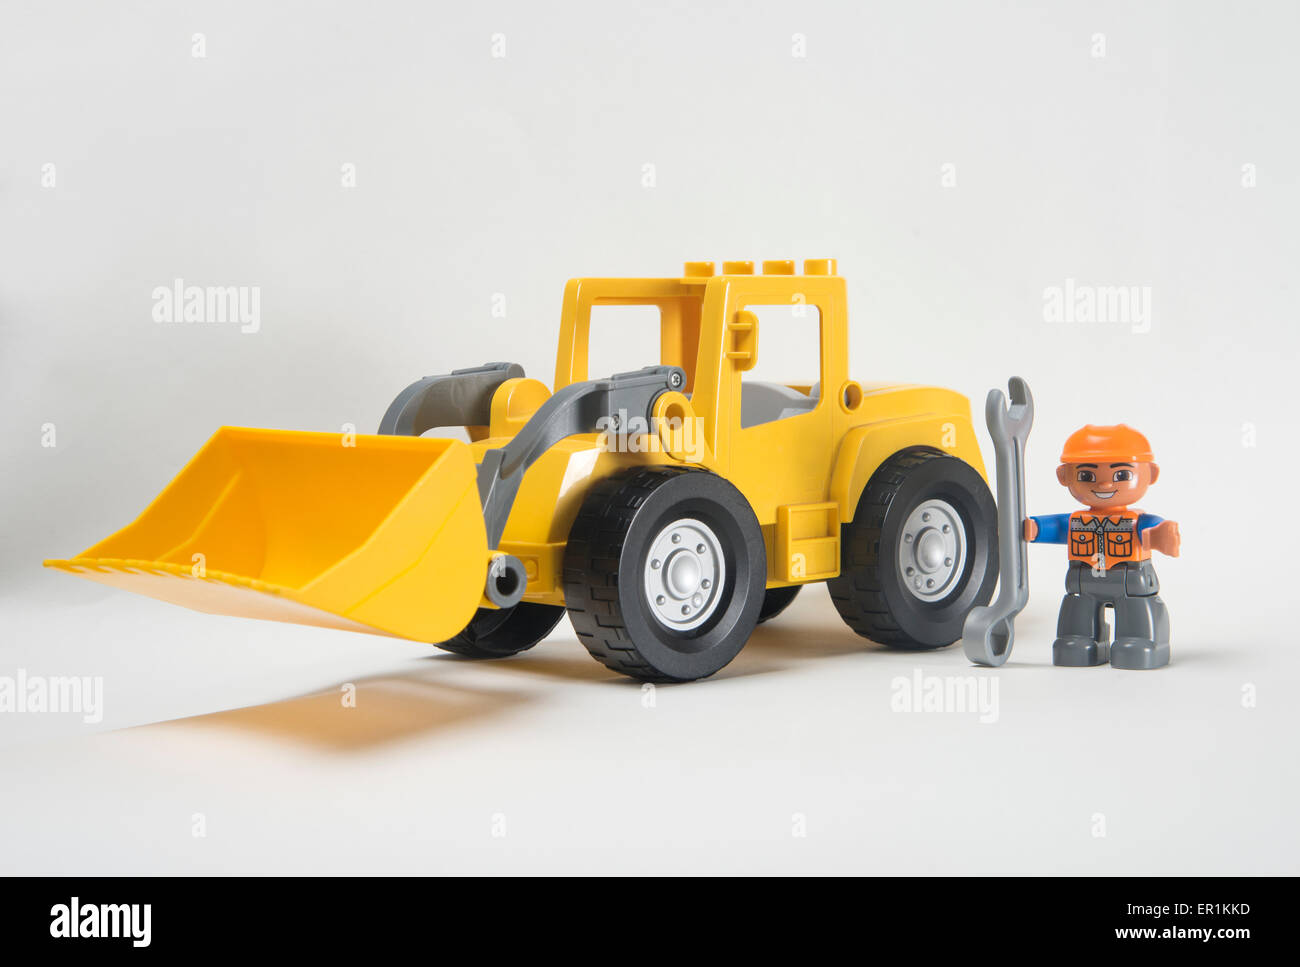 Man at work. Lego Duplo front loader digger with driver holding spanner Stock Photo